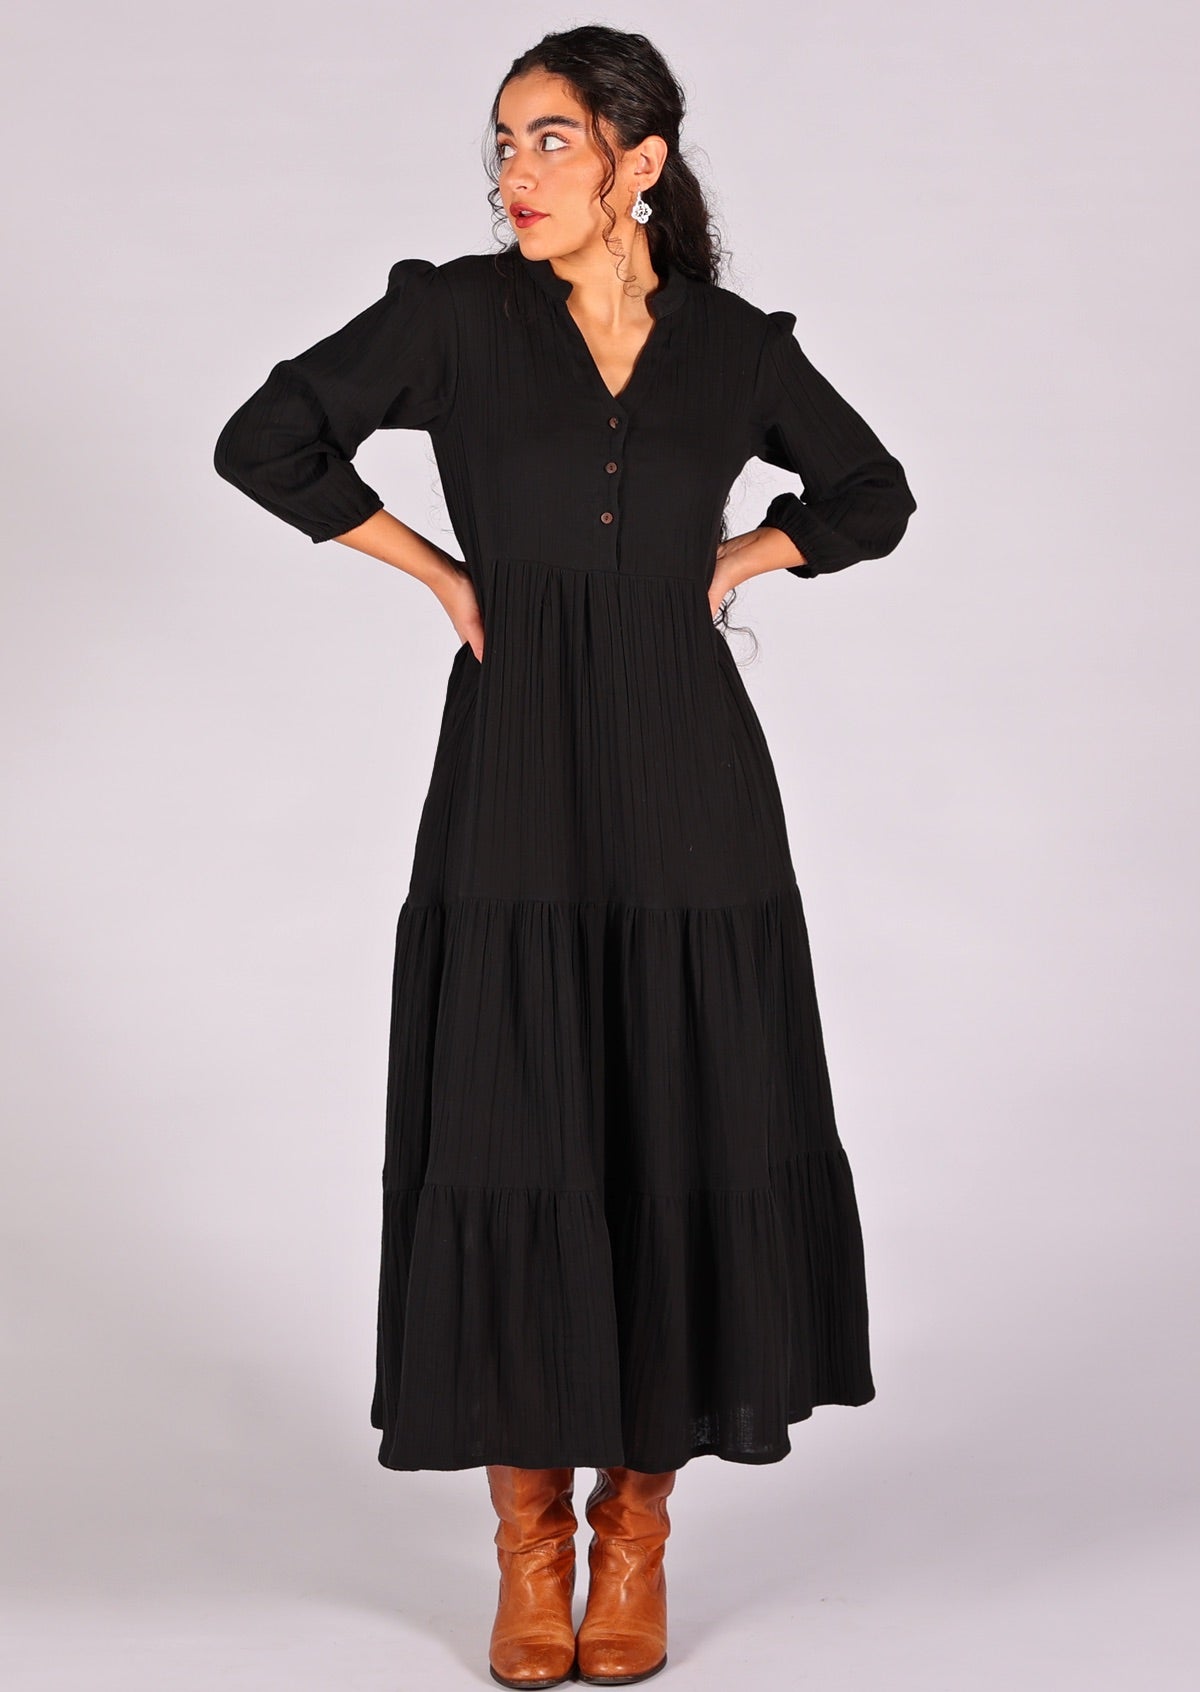 Make a statement in this double cotton tiered maxi dress in wardrobe staple black 